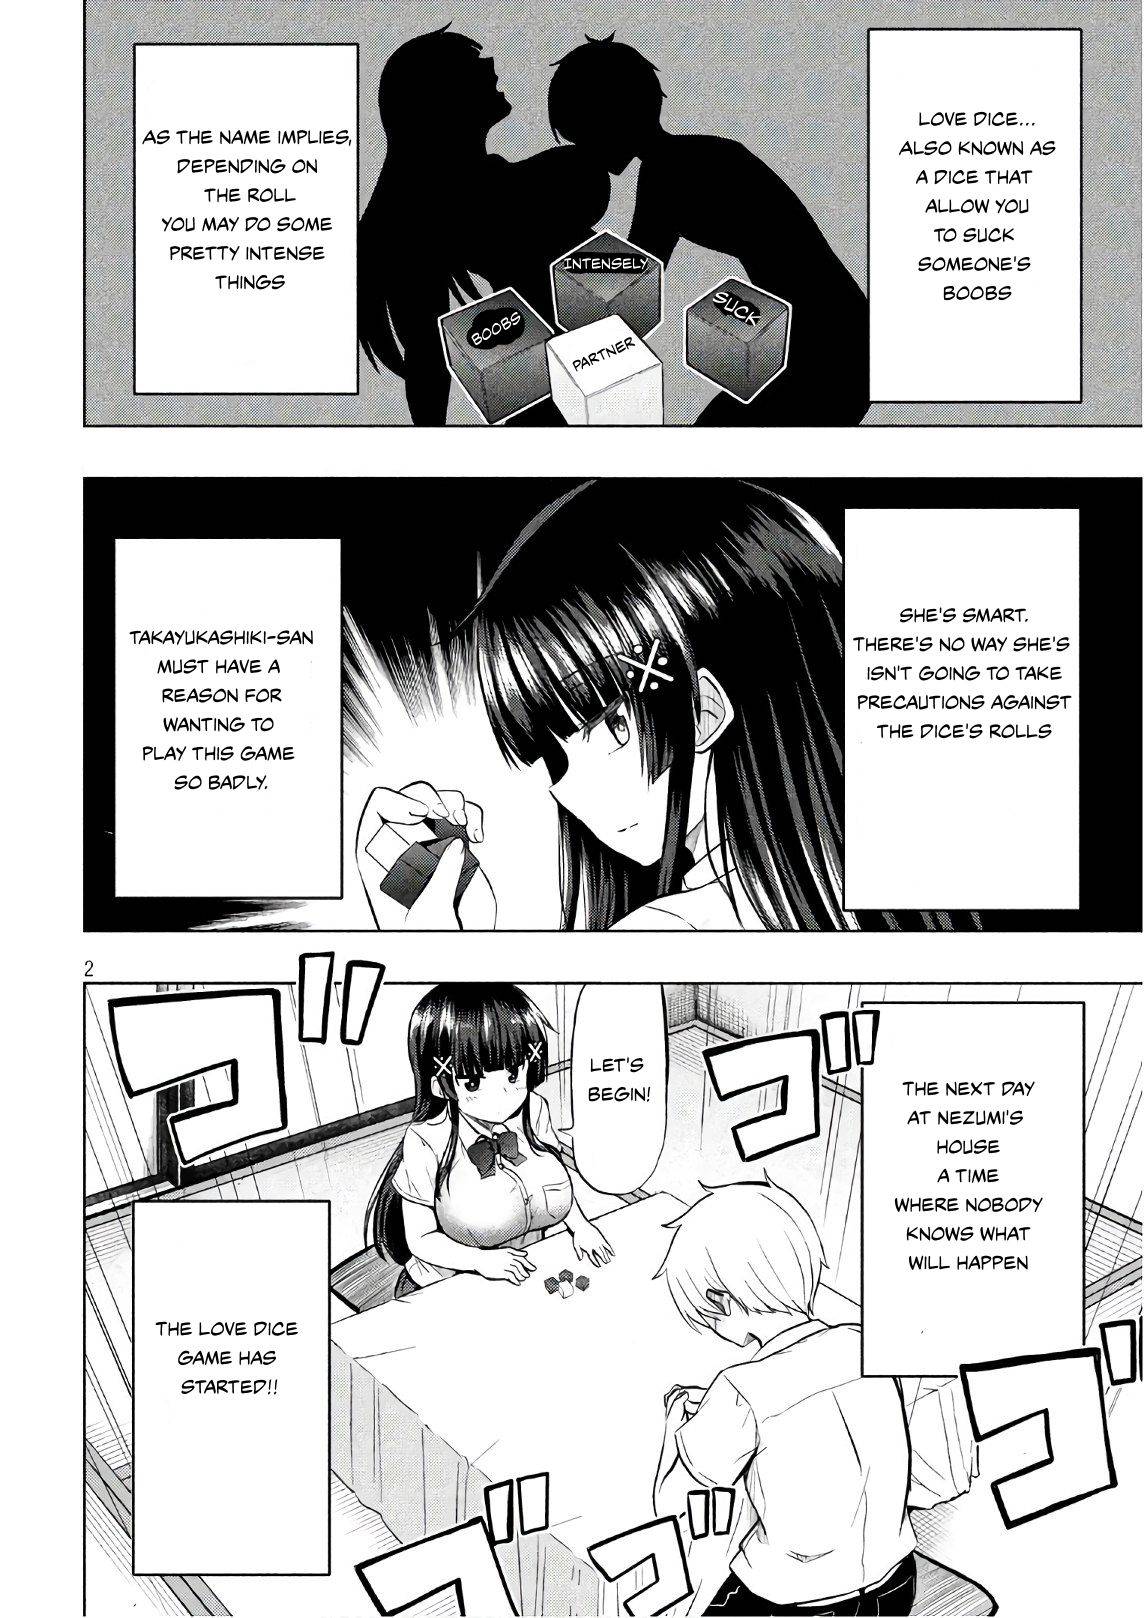 A Girl Who Is Very Well-Informed About Weird Knowledge, Takayukashiki Souko-san - chapter 28 - #2